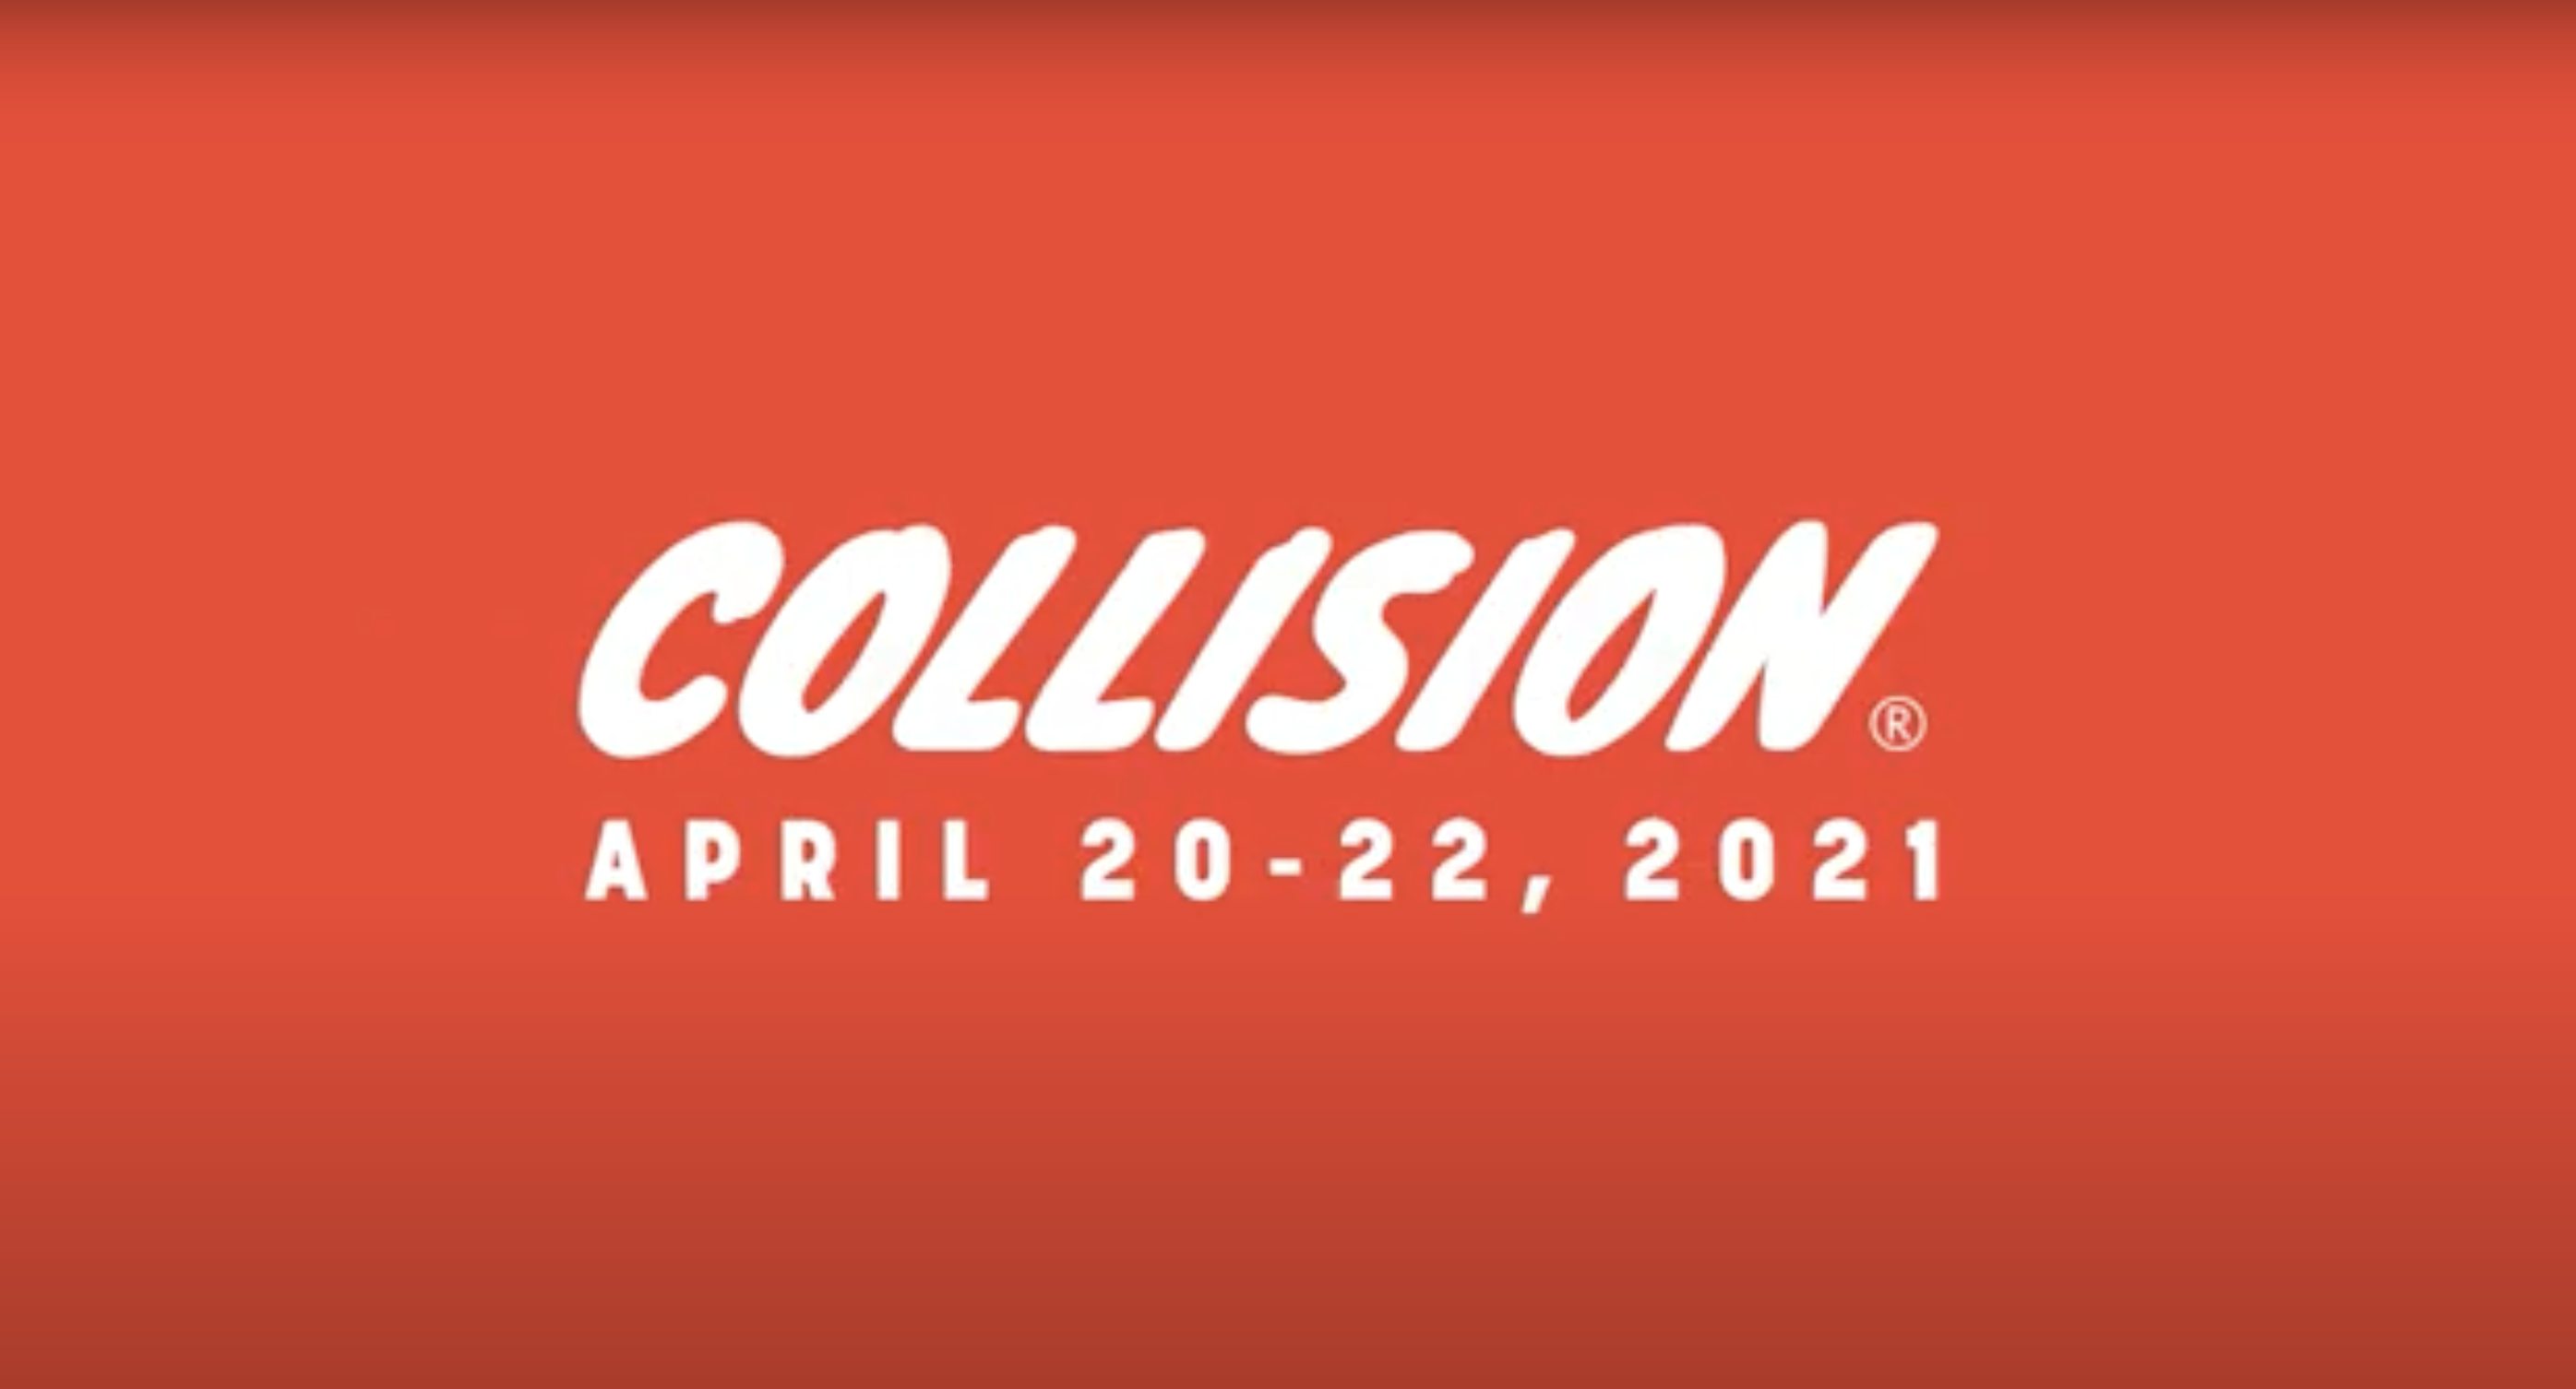 Collision grows to welcome 38,039 attendees to its second virtual event